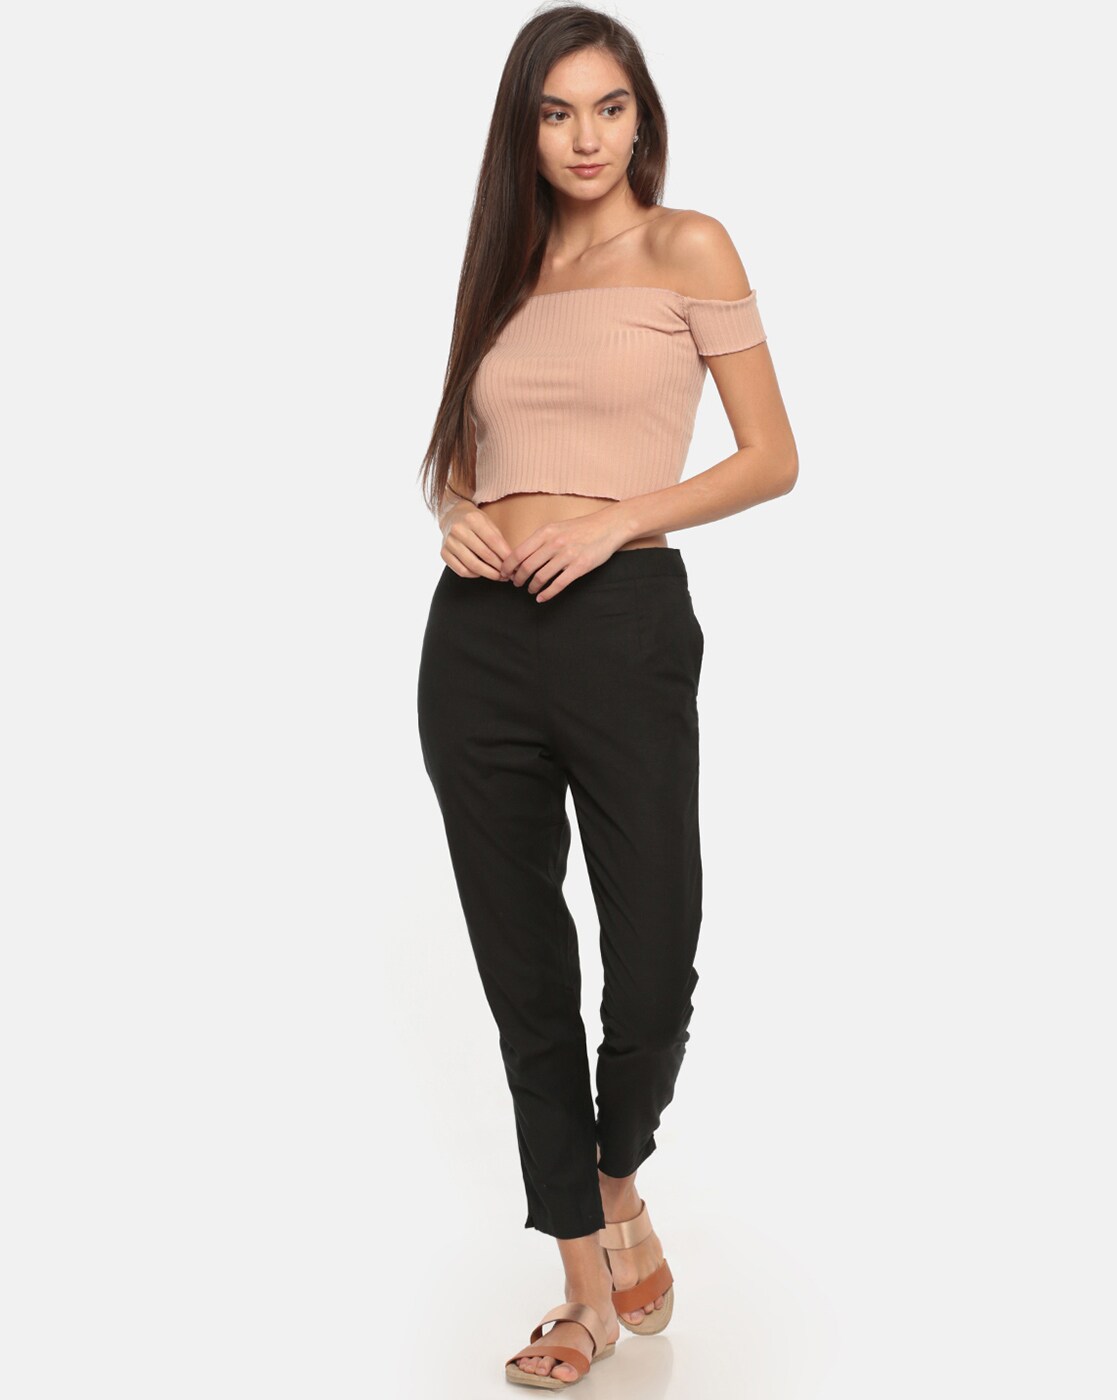 Palazzos for office wear - Comfortable, formal & easy to wear! - Newz Hook  | Disability News - Changing Attitudes towards Disability